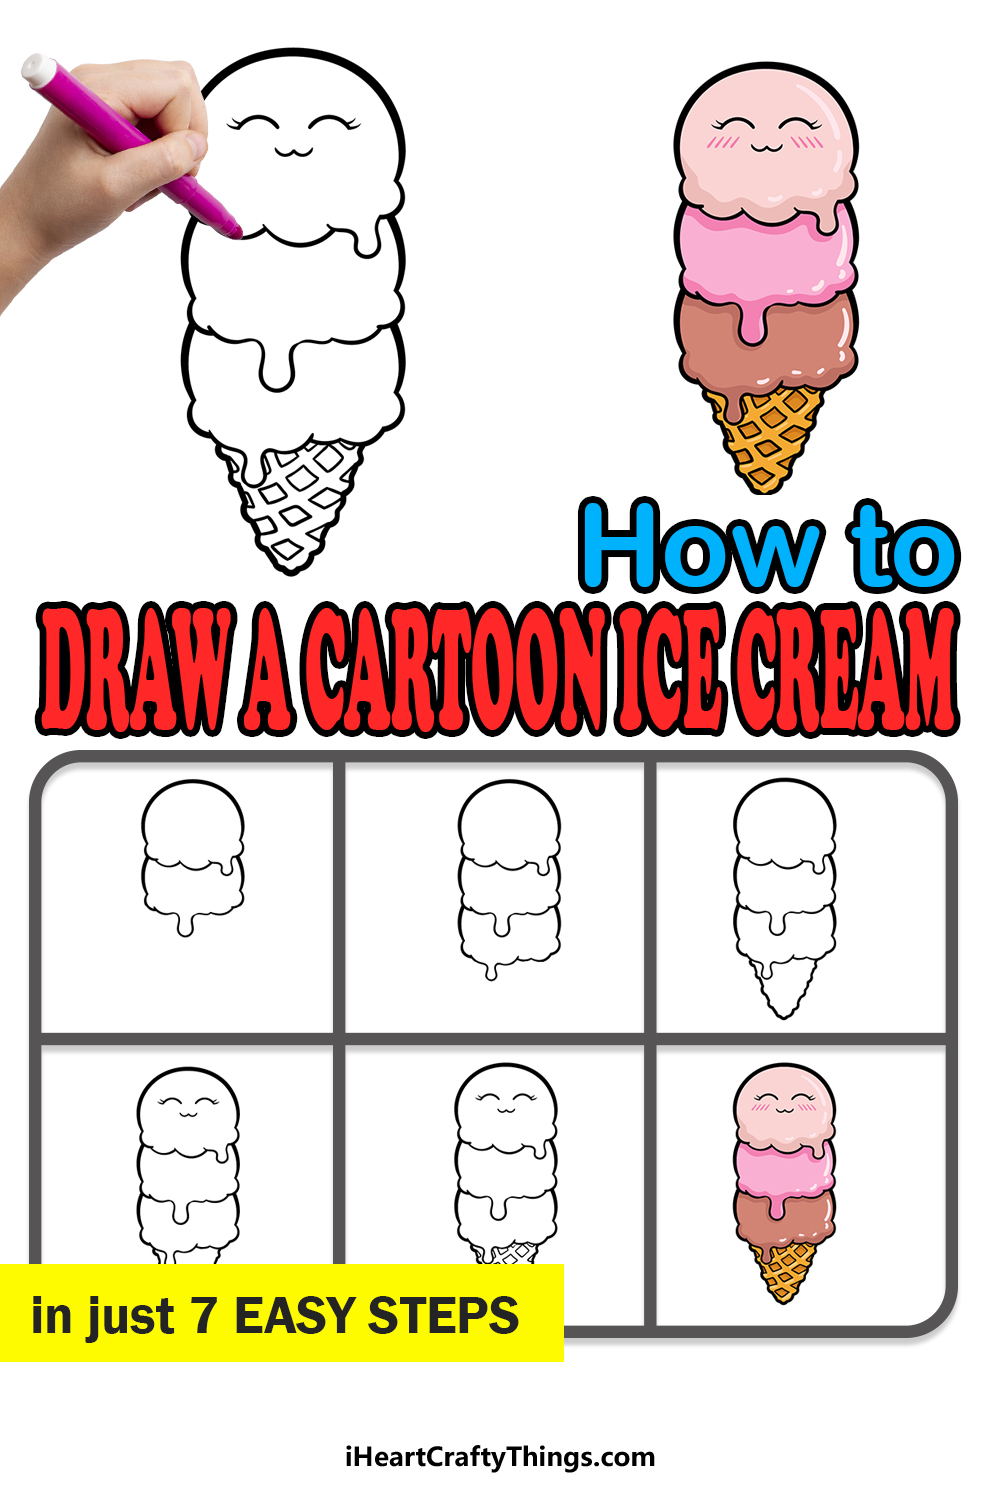 how to draw a cartoon Ice Cream in 7 easy steps